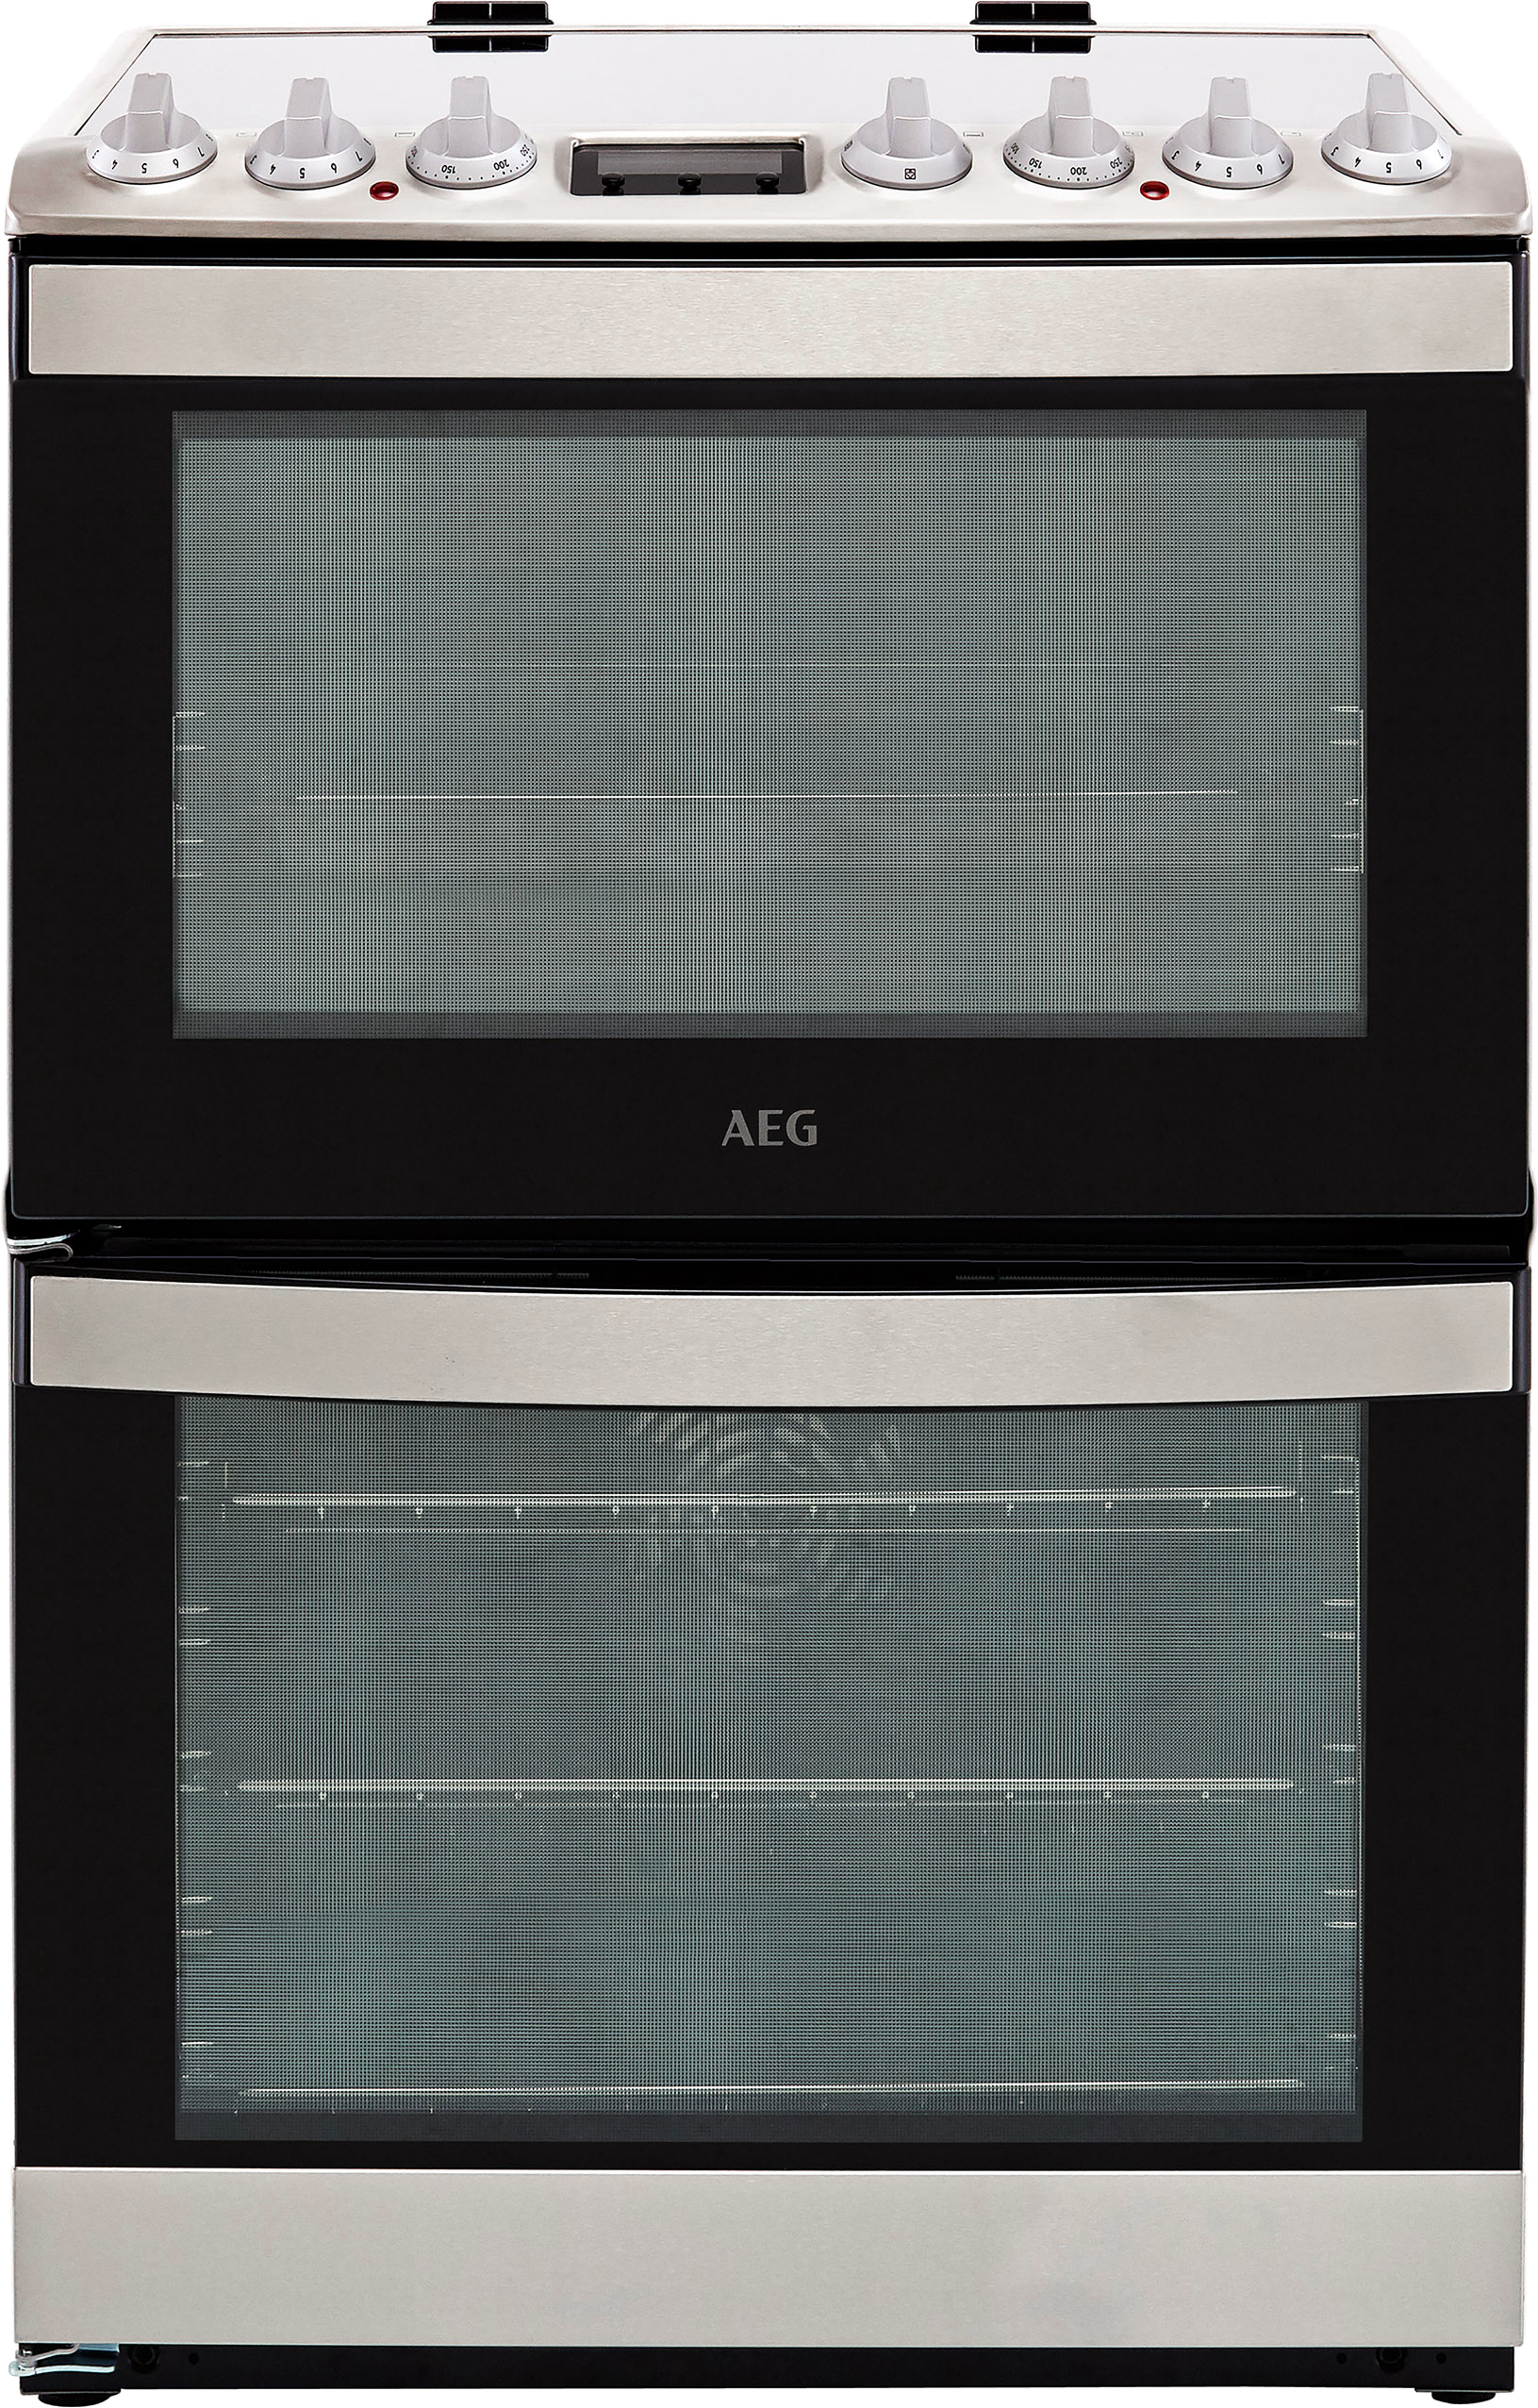 AEG CCB6740ACM 60cm Electric Cooker with Ceramic Hob - Stainless Steel - A/A Rated, Stainless Steel